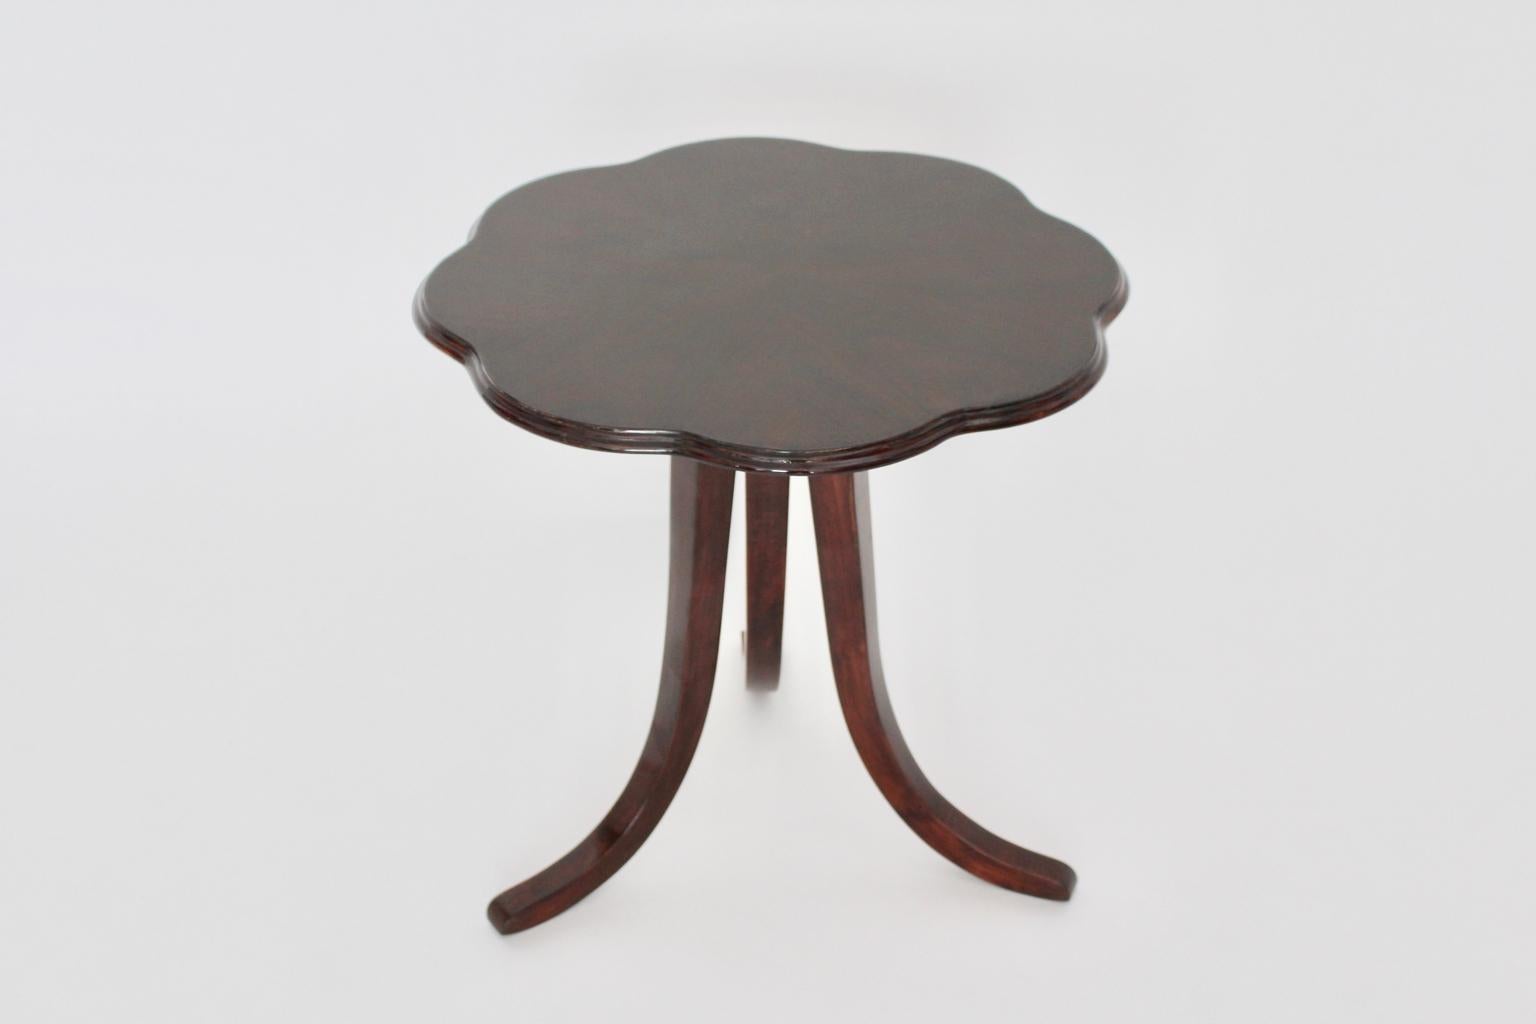 Art Deco Walnut Side Table or Coffee Table by Josef Frank for Thonet, circa 1925 For Sale 4